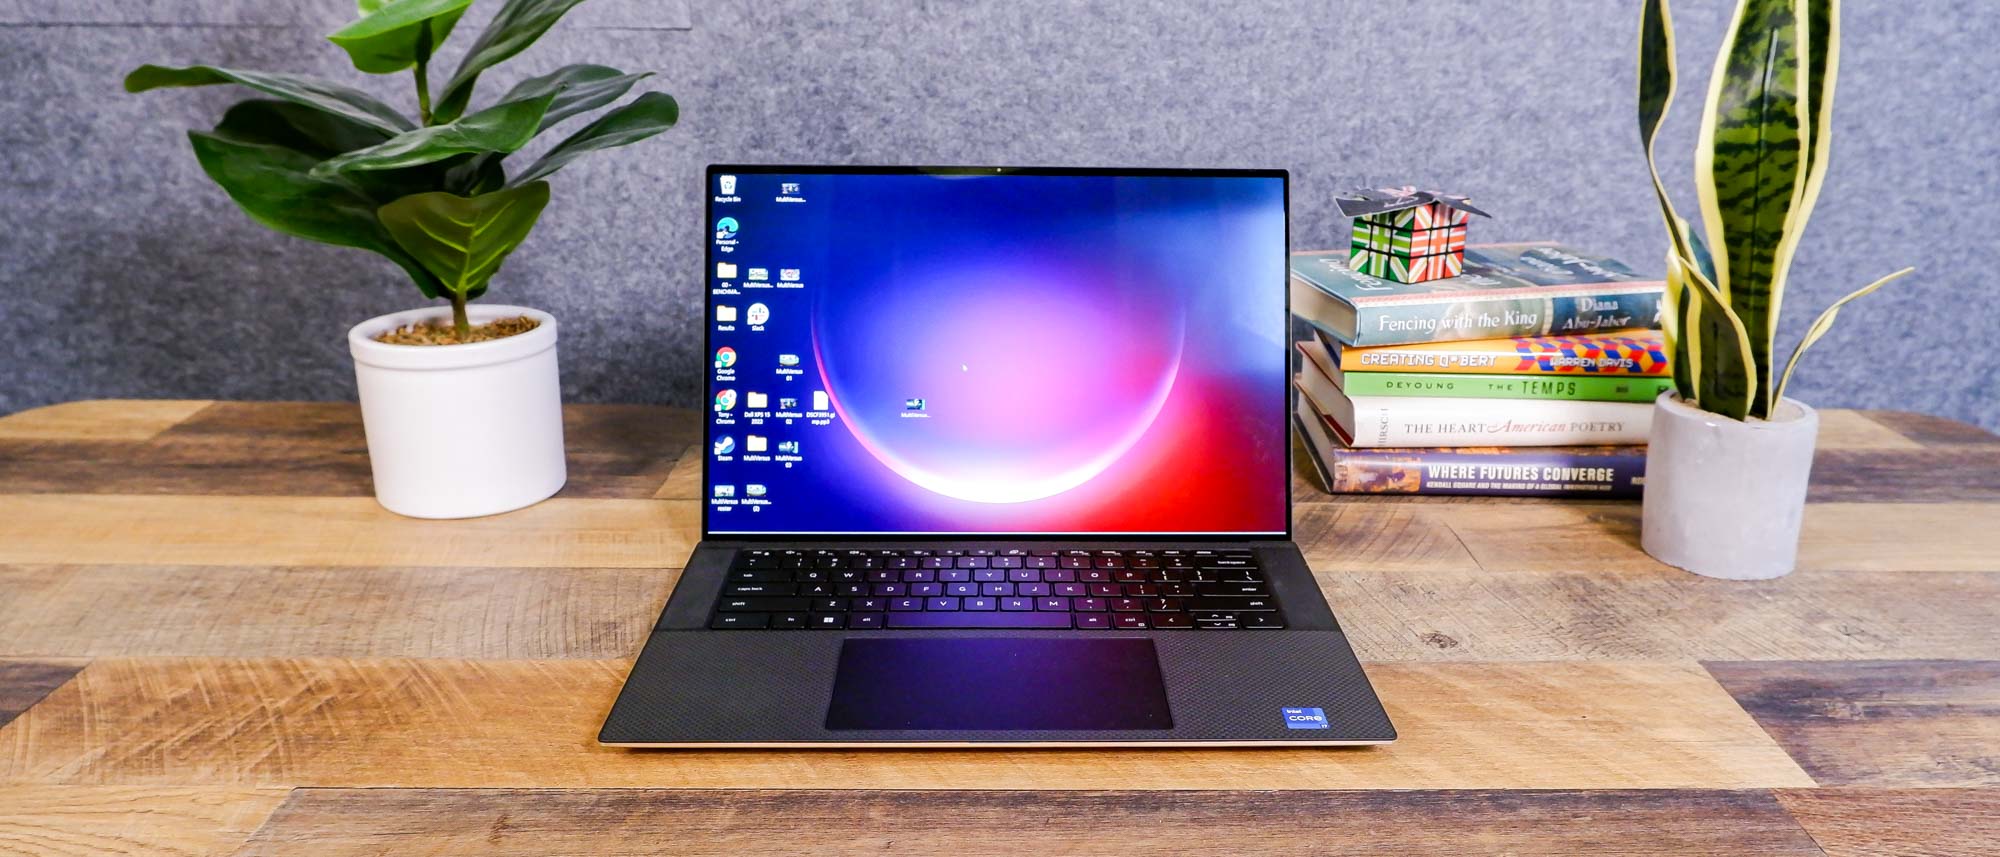 Dell XPS 15 OLED (2021) review: The ultimate laptop for pros